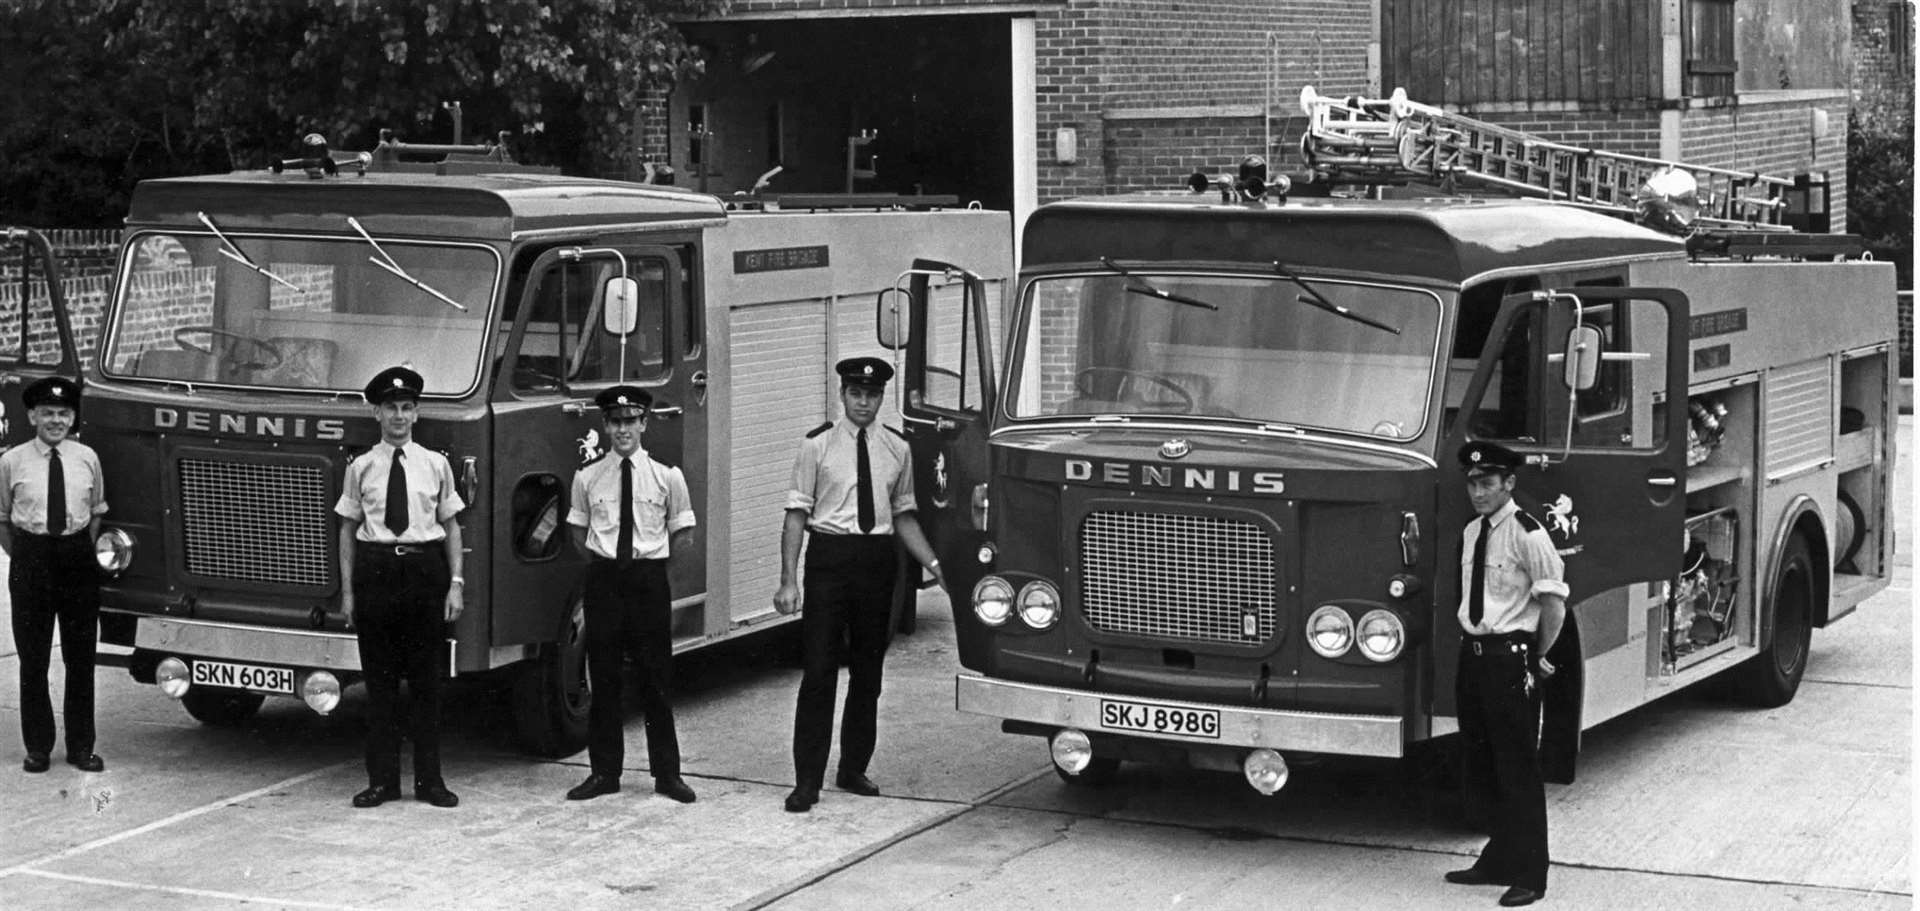 Dover firemen pictured in August 1969